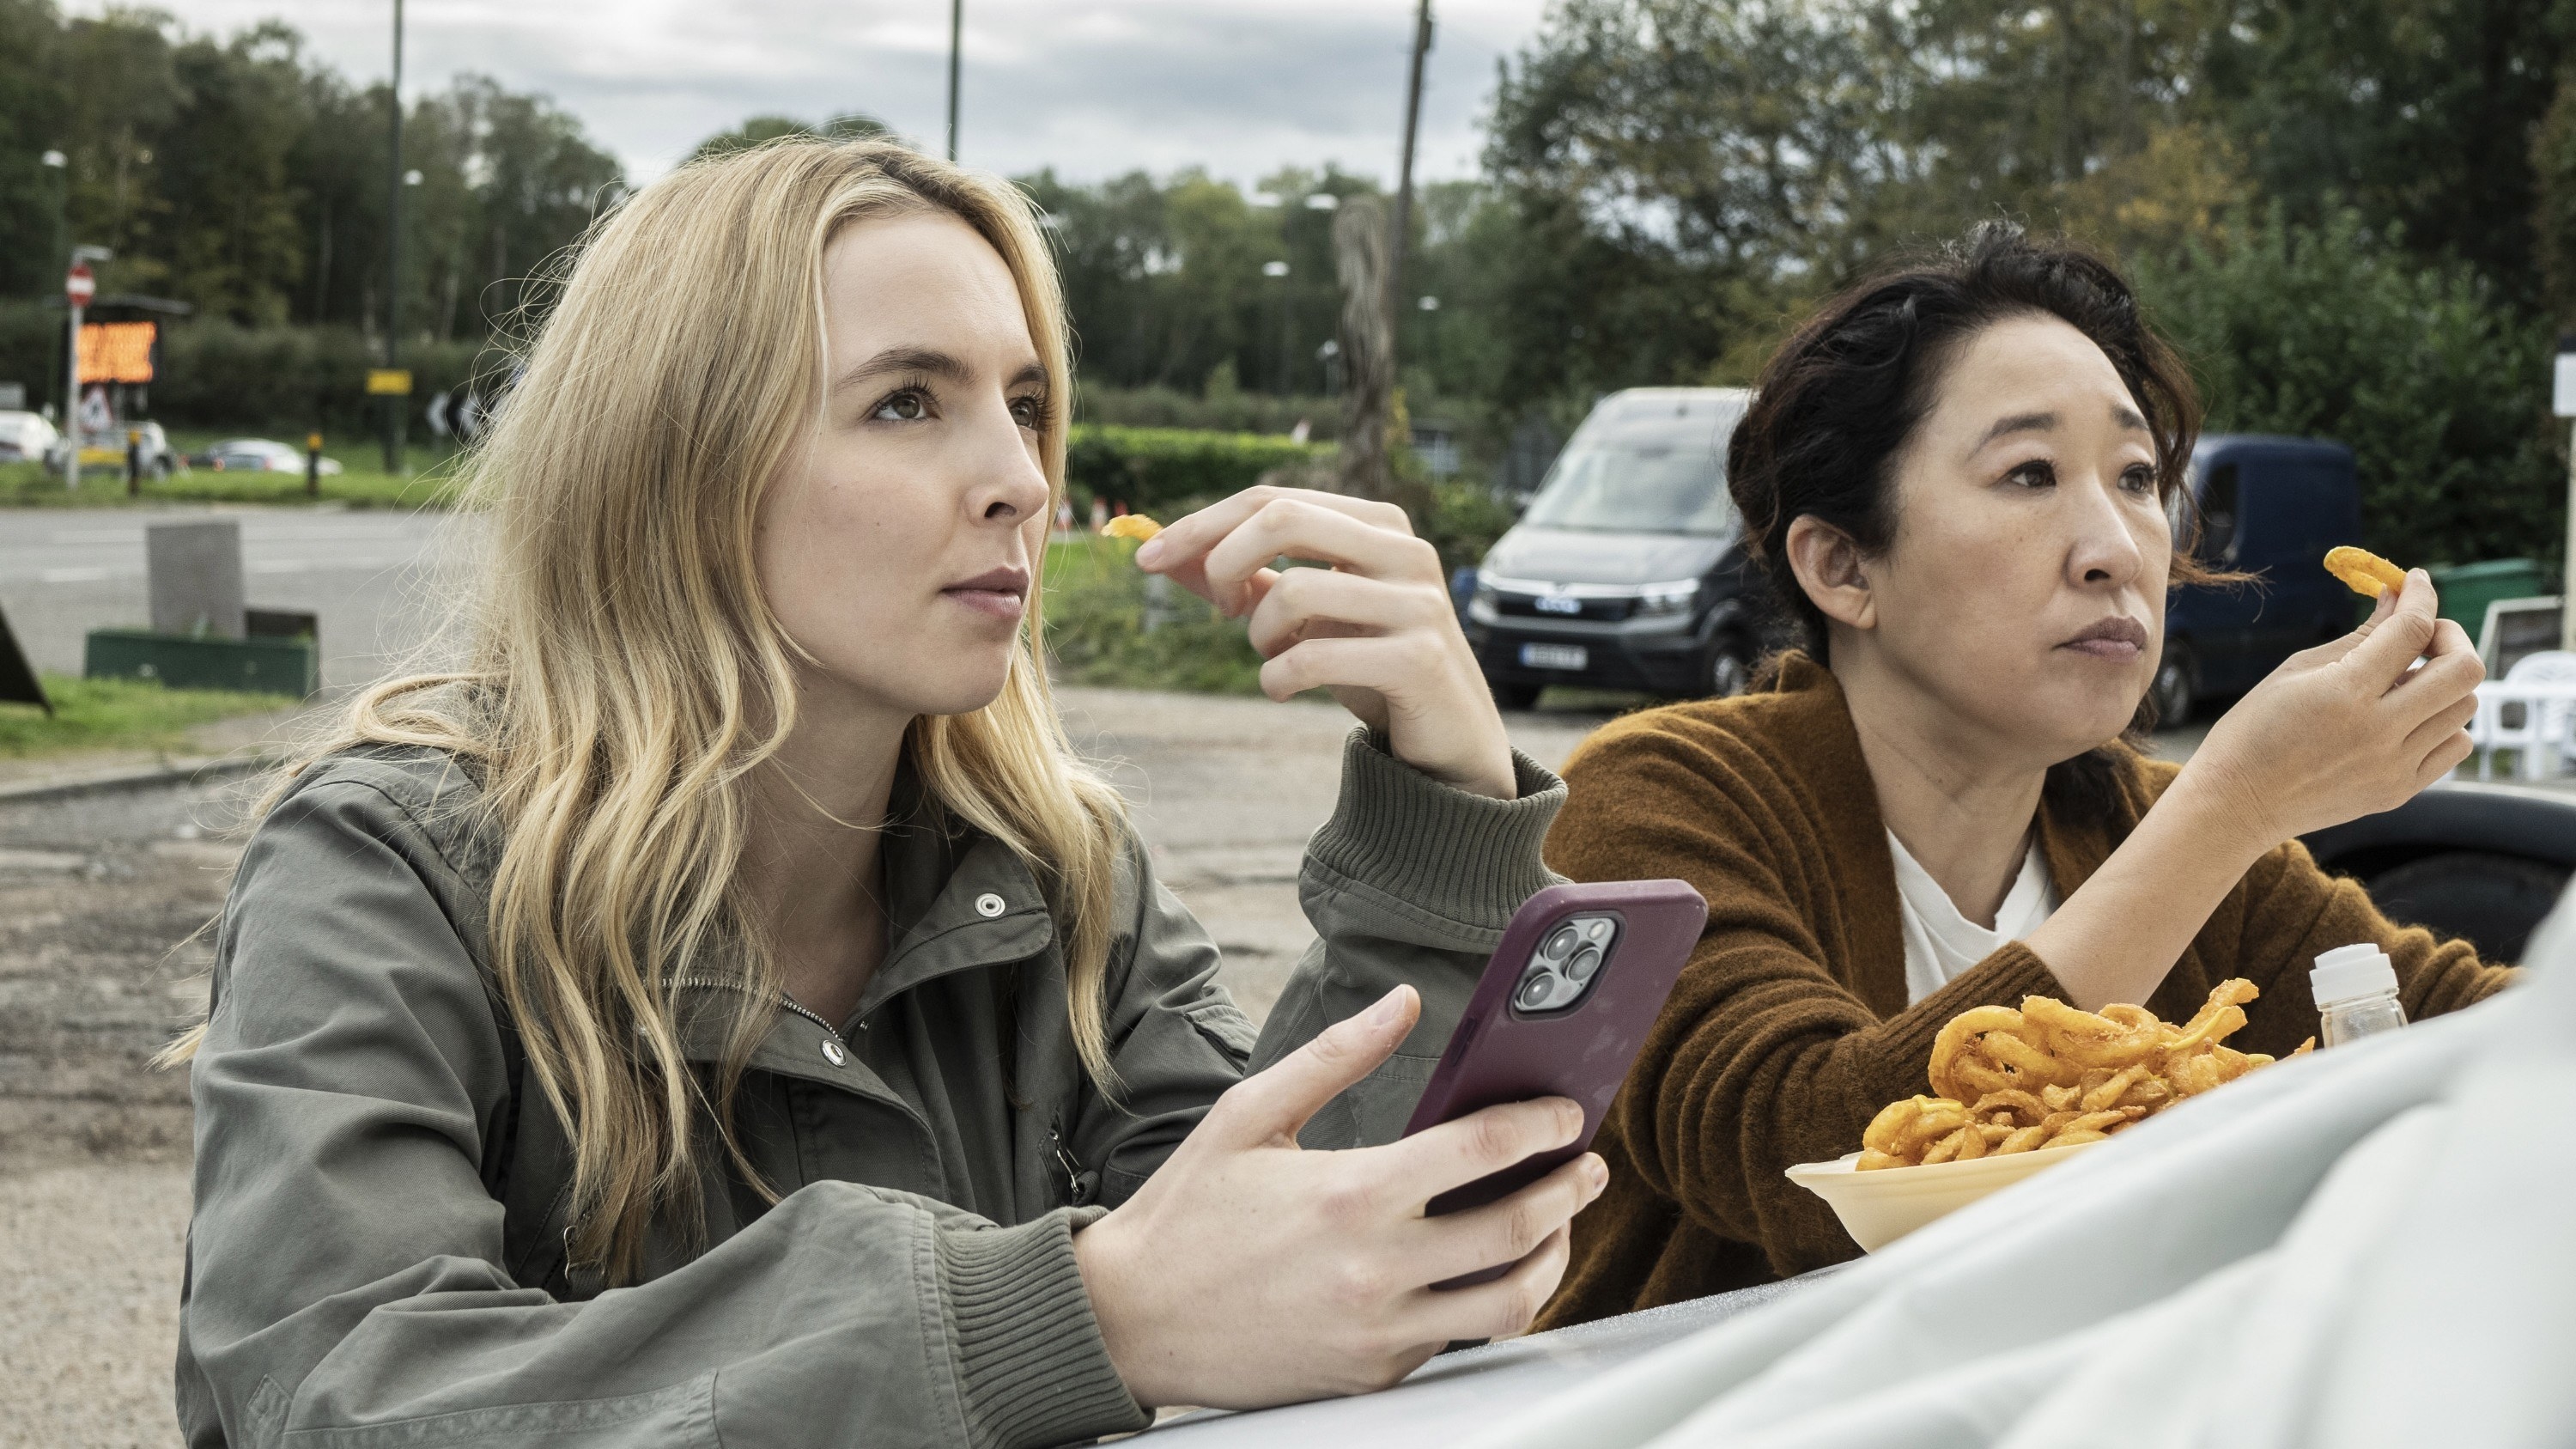 two women eating onion rings in a park